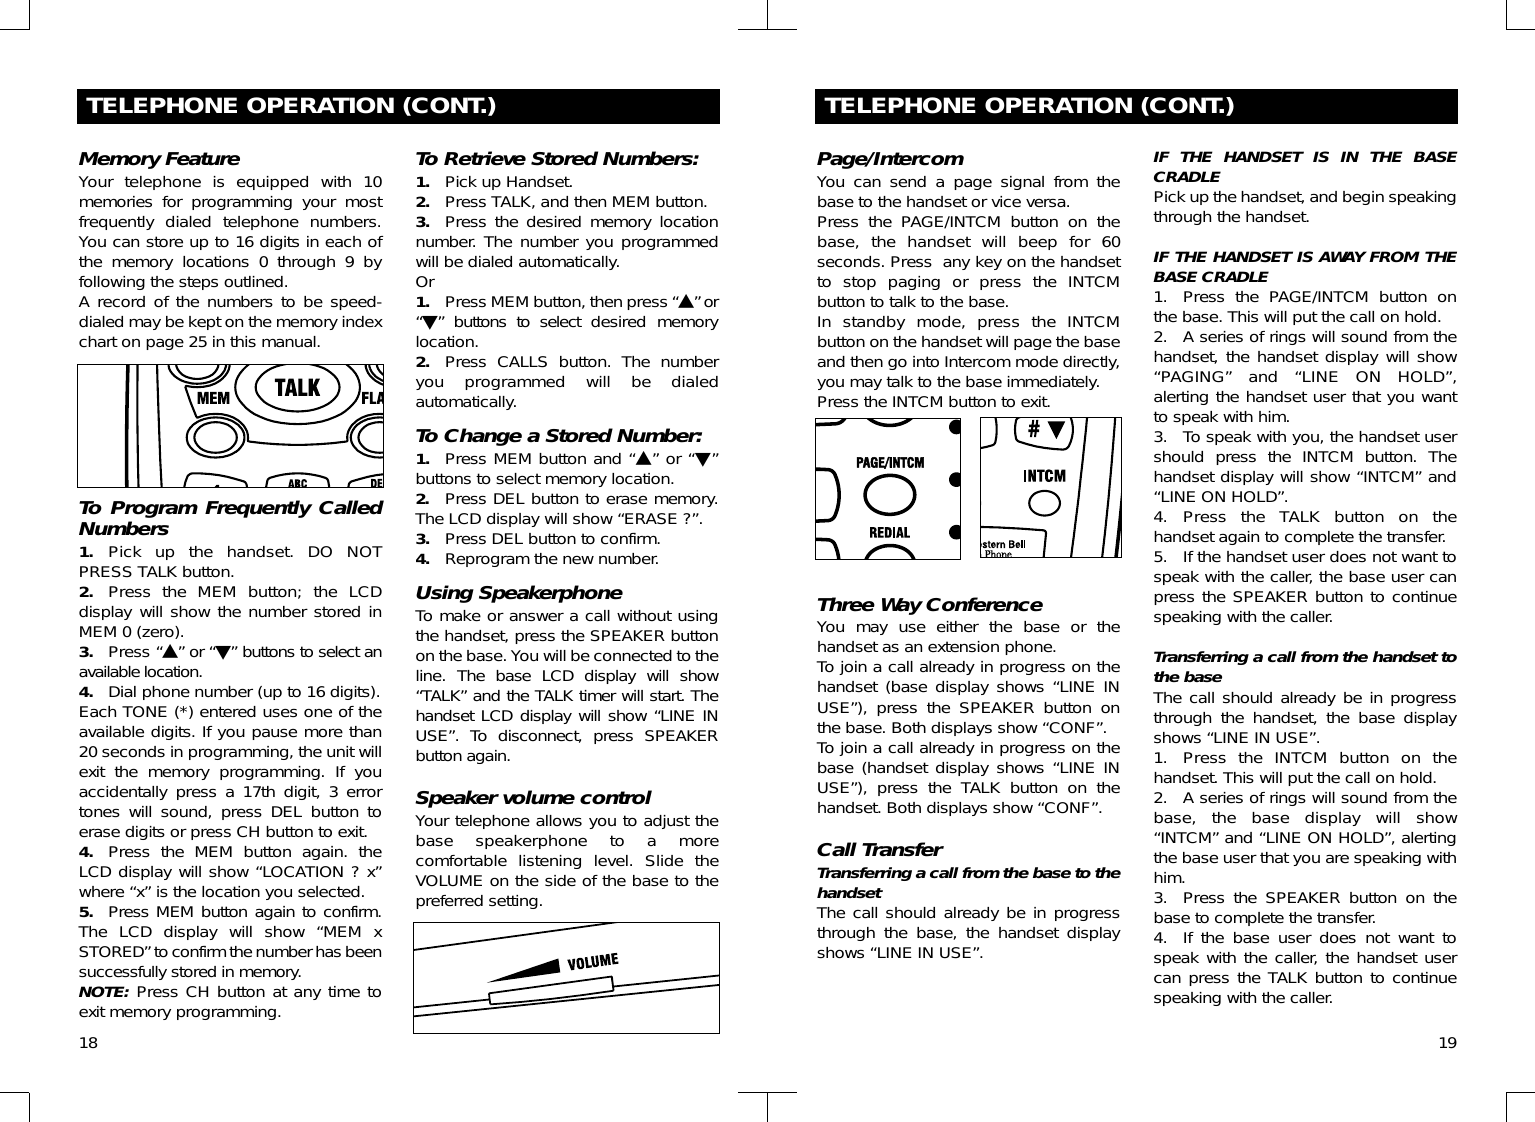 18TELEPHONE OPERATION (CONT.)Memory FeatureYour telephone is equipped with 10memories for programming your mostfrequently dialed telephone numbers.You can store up to 16 digits in each ofthe memory locations 0 through 9 byfollowing the steps outlined.A record of the numbers to be speed-dialed may be kept on the memory indexchart on page 25 in this manual. To Program Frequently CalledNumbers 1. Pick up the handset. DO NOTPRESS TALK button.2. Press the MEM button; the LCDdisplay will show the number stored inMEM 0 (zero).3. Press “▲” or “▼” buttons to select anavailable location.4. Dial phone number (up to 16 digits). Each TONE (*) entered uses one of theavailable digits. If you pause more than20 seconds in programming, the unit willexit the memory programming. If youaccidentally press a 17th digit, 3 errortones will sound, press DEL button toerase digits or press CH button to exit.4. Press the MEM button again. theLCD display will show “LOCATION ? x”where “x” is the location you selected.5. Press MEM button again to confirm.The LCD display will show “MEM xSTORED” to confirm the number has beensuccessfully stored in memory.NOTE: Press CH button at any time toexit memory programming.To Retrieve Stored Numbers:1. Pick up Handset.2. Press TALK, and then MEM button.3. Press the desired memory locationnumber. The number you programmedwill be dialed automatically.Or1. Press MEM button, then press “▲” or“▼” buttons to select desired memorylocation.2. Press CALLS button. The numberyou programmed will be dialedautomatically.To Change a Stored Number:1. Press MEM button and “▲” or “▼”buttons to select memory location.2. Press DEL button to erase memory.The LCD display will show “ERASE ?”.3. Press DEL button to confirm.4. Reprogram the new number.Using SpeakerphoneTo make or answer a call without usingthe handset, press the SPEAKER buttonon the base. You will be connected to theline.  The base LCD display will show“TALK” and the TALK timer will start. Thehandset LCD display will show “LINE INUSE”. To disconnect, press SPEAKERbutton again.Speaker volume controlYour telephone allows you to adjust thebase speakerphone to a morecomfortable listening level. Slide theVOLUME on the side of the base to thepreferred setting.19TELEPHONE OPERATION (CONT.)Page/IntercomYou can send a page signal from thebase to the handset or vice versa.Press the PAGE/INTCM button on thebase, the handset will beep for 60seconds. Press  any key on the handsetto stop paging or press the INTCMbutton to talk to the base.In standby mode, press the INTCMbutton on the handset will page the baseand then go into Intercom mode directly,you may talk to the base immediately.Press the INTCM button to exit.Three Way ConferenceYou may use either the base or thehandset as an extension phone.To join a call already in progress on thehandset (base display shows “LINE INUSE”), press the SPEAKER button onthe base. Both displays show “CONF”.To join a call already in progress on thebase (handset display shows “LINE INUSE”), press the TALK button on thehandset. Both displays show “CONF”.Call TransferTransferring a call from the base to thehandsetThe call should already be in progressthrough the base, the handset displayshows “LINE IN USE”.IF THE HANDSET IS IN THE BASECRADLEPick up the handset, and begin speakingthrough the handset.IF THE HANDSET IS AWAY FROM THEBASE CRADLE1. Press the PAGE/INTCM button onthe base. This will put the call on hold.2. A series of rings will sound from thehandset, the handset display will show“PAGING” and “LINE ON HOLD”,alerting the handset user that you wantto speak with him.3. To speak with you, the handset usershould press the INTCM button. Thehandset display will show “INTCM” and“LINE ON HOLD”.4. Press the TALK button on thehandset again to complete the transfer.5. If the handset user does not want tospeak with the caller, the base user canpress the SPEAKER button to continuespeaking with the caller.Transferring a call from the handset tothe baseThe call should already be in progressthrough the handset, the base displayshows “LINE IN USE”.1. Press the INTCM button on thehandset. This will put the call on hold.2. A series of rings will sound from thebase, the base display will show“INTCM” and “LINE ON HOLD”, alertingthe base user that you are speaking withhim.3. Press the SPEAKER button on thebase to complete the transfer.4. If the base user does not want tospeak with the caller, the handset usercan press the TALK button to continuespeaking with the caller.